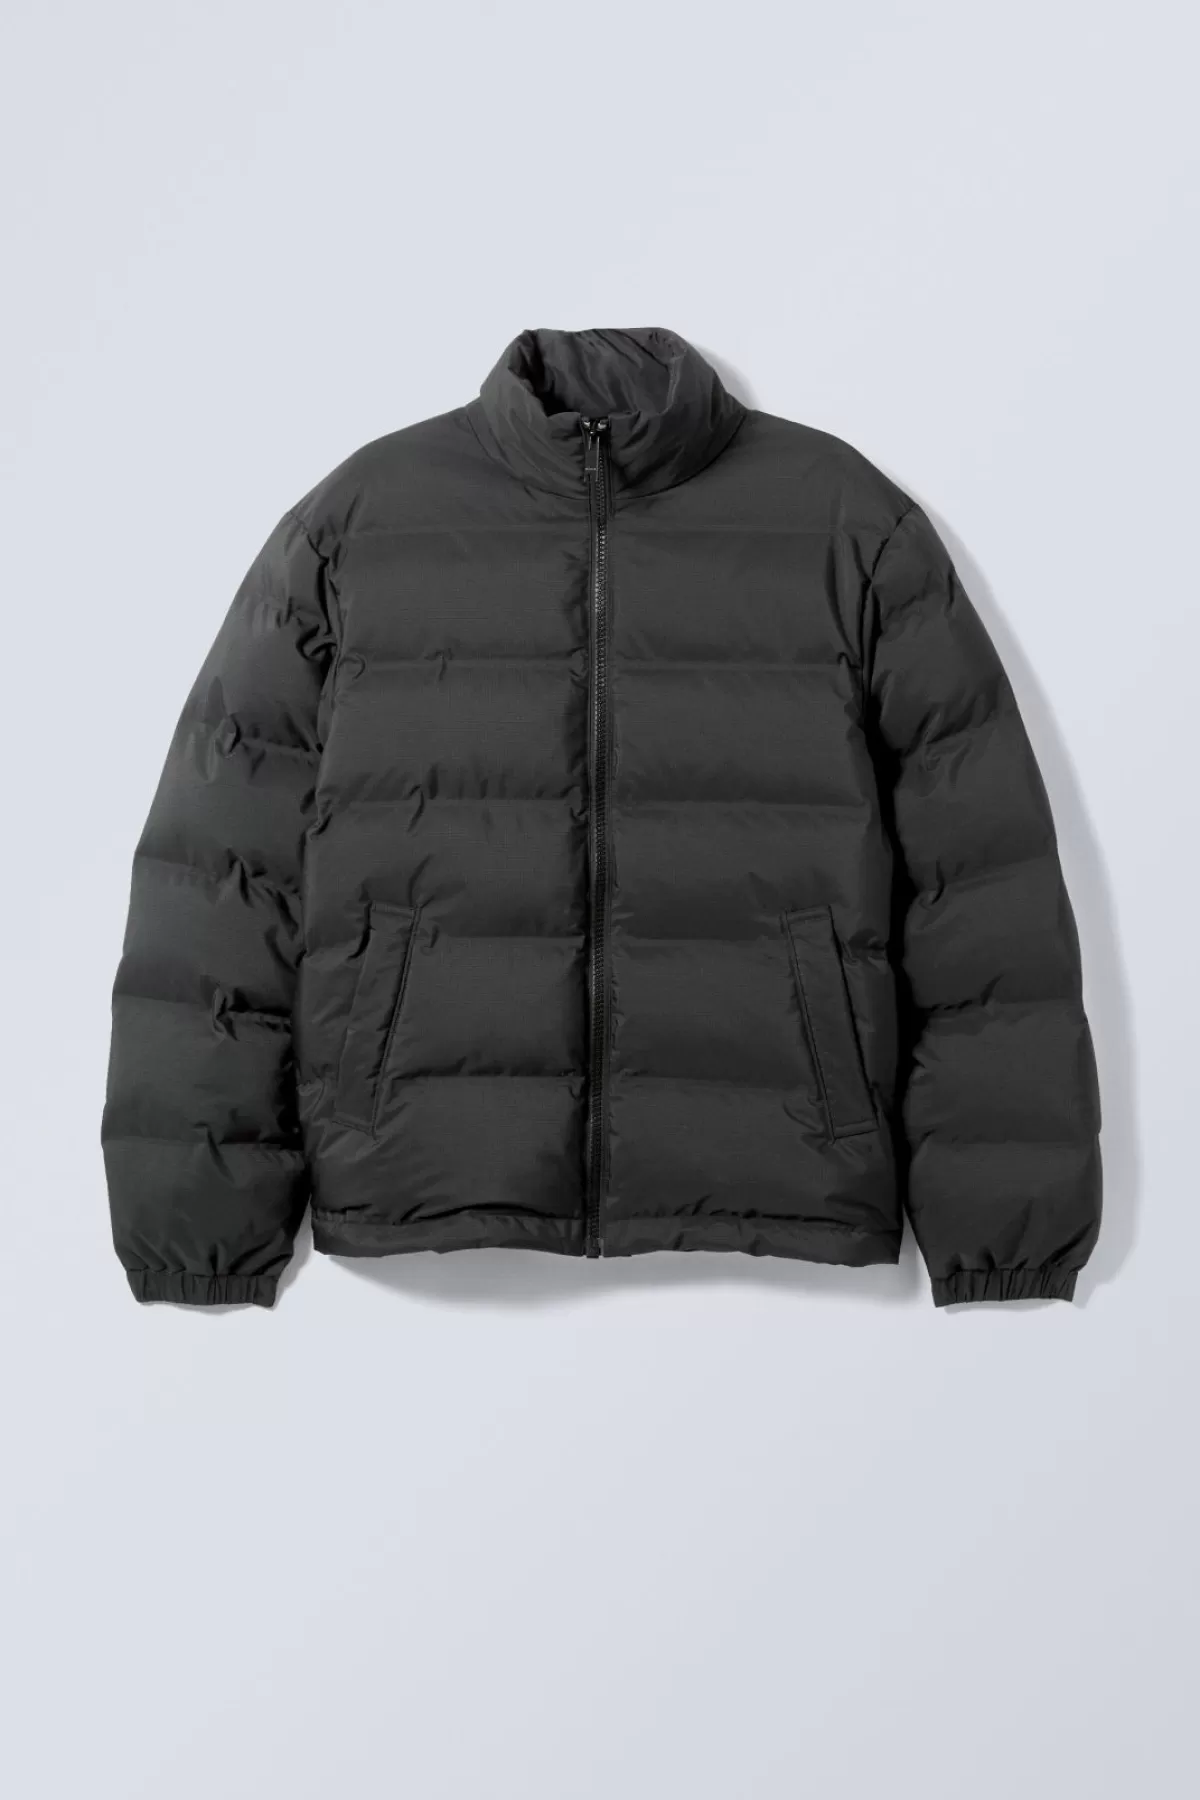 Weekday Cole Puffer Jacket Black Discount